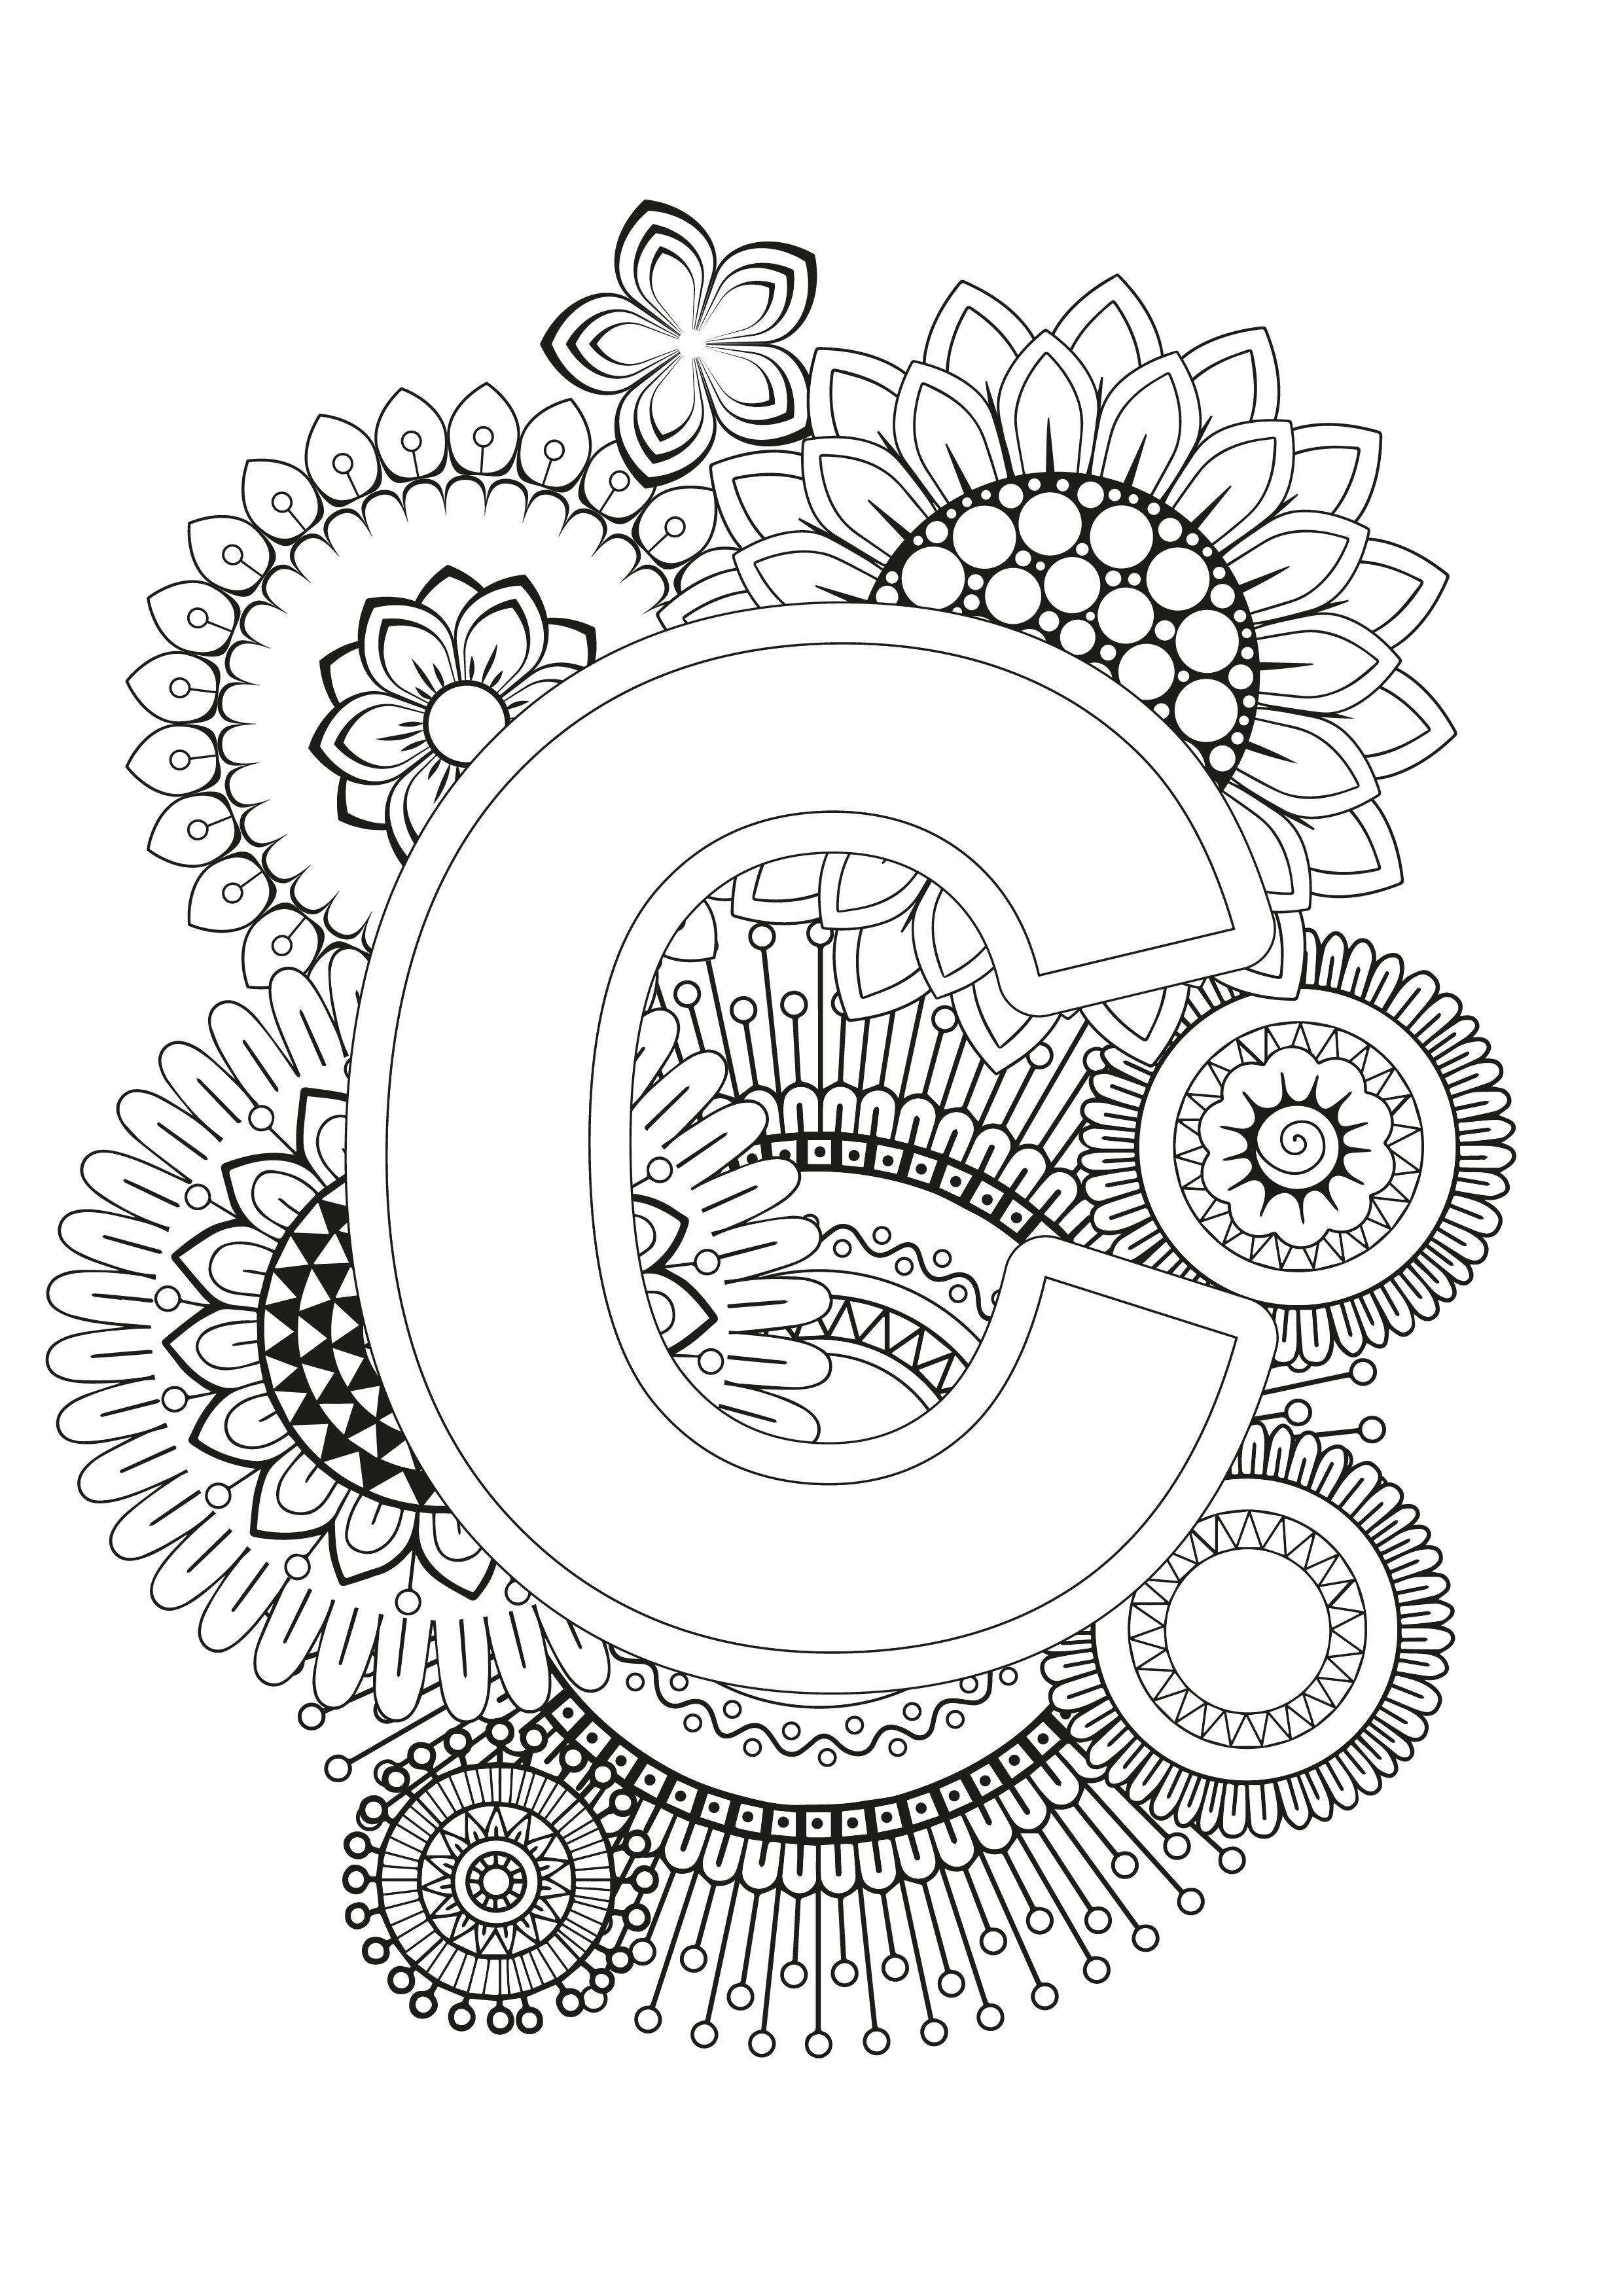 mindfulness coloring page alphabet coloring letters